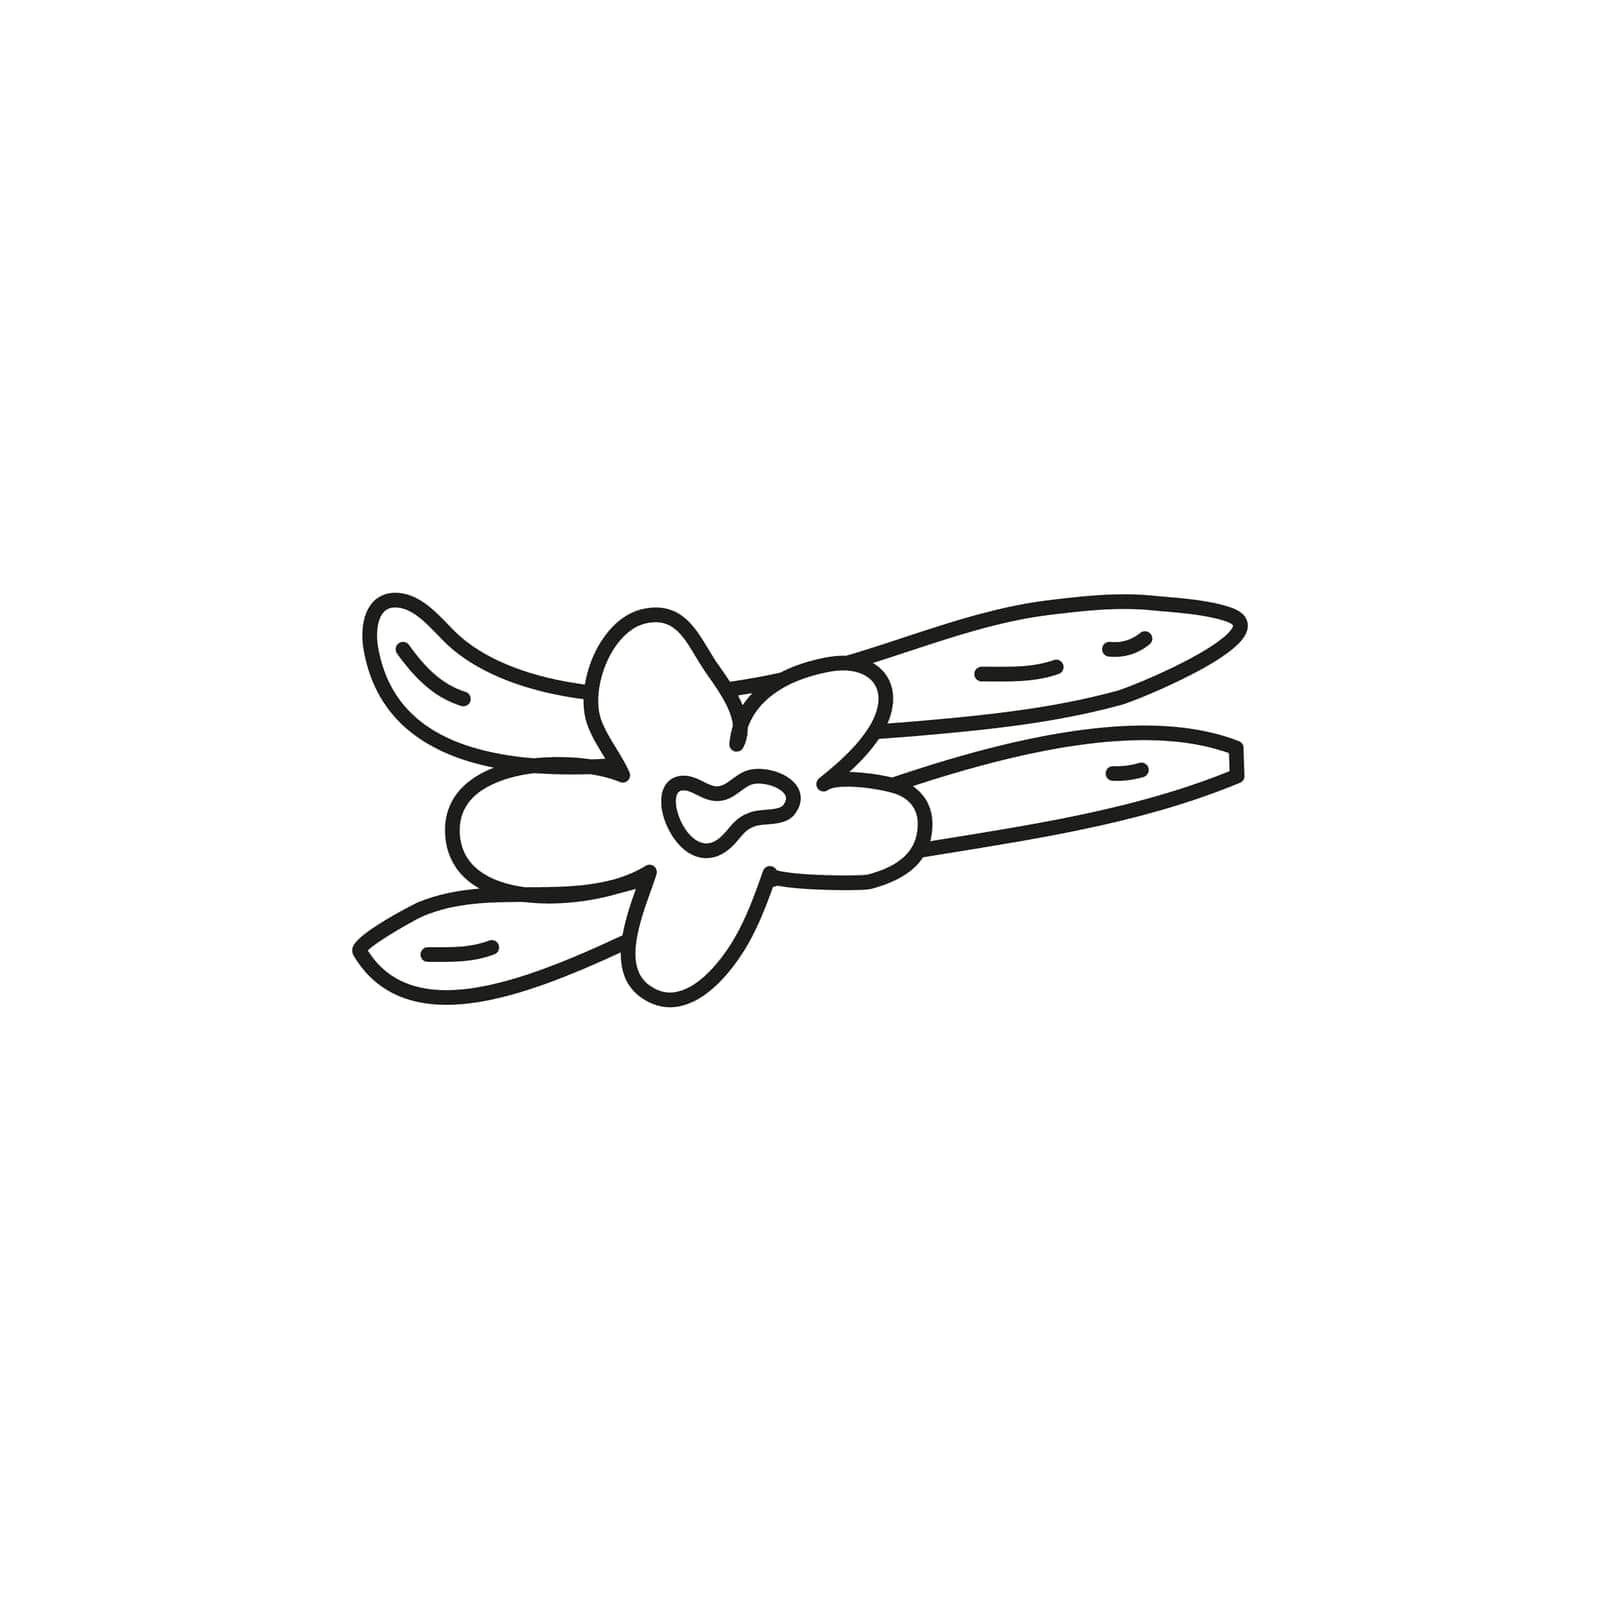 Doodle outline vanilla flower and sticks spice isolated on white background.